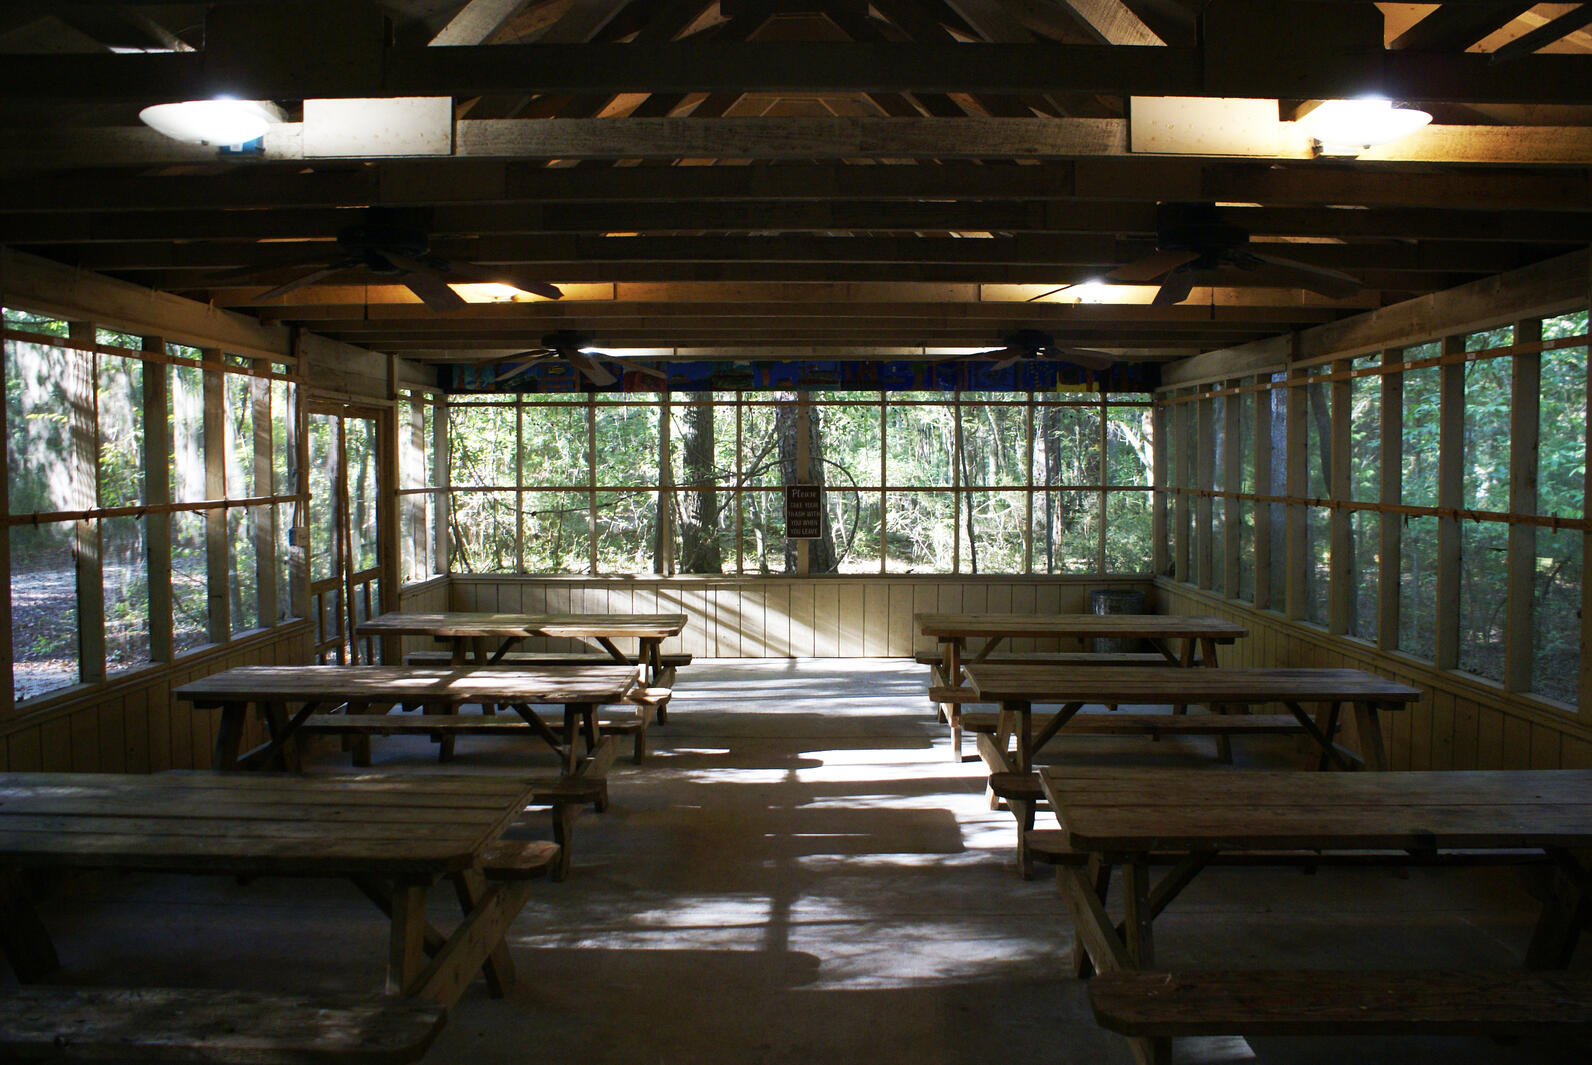 A view from inside Beidler's outdoor classroom, only in the opposite direction. The tables in all of their glory point to two more tables, and outside there are small trees filling the space beyond.